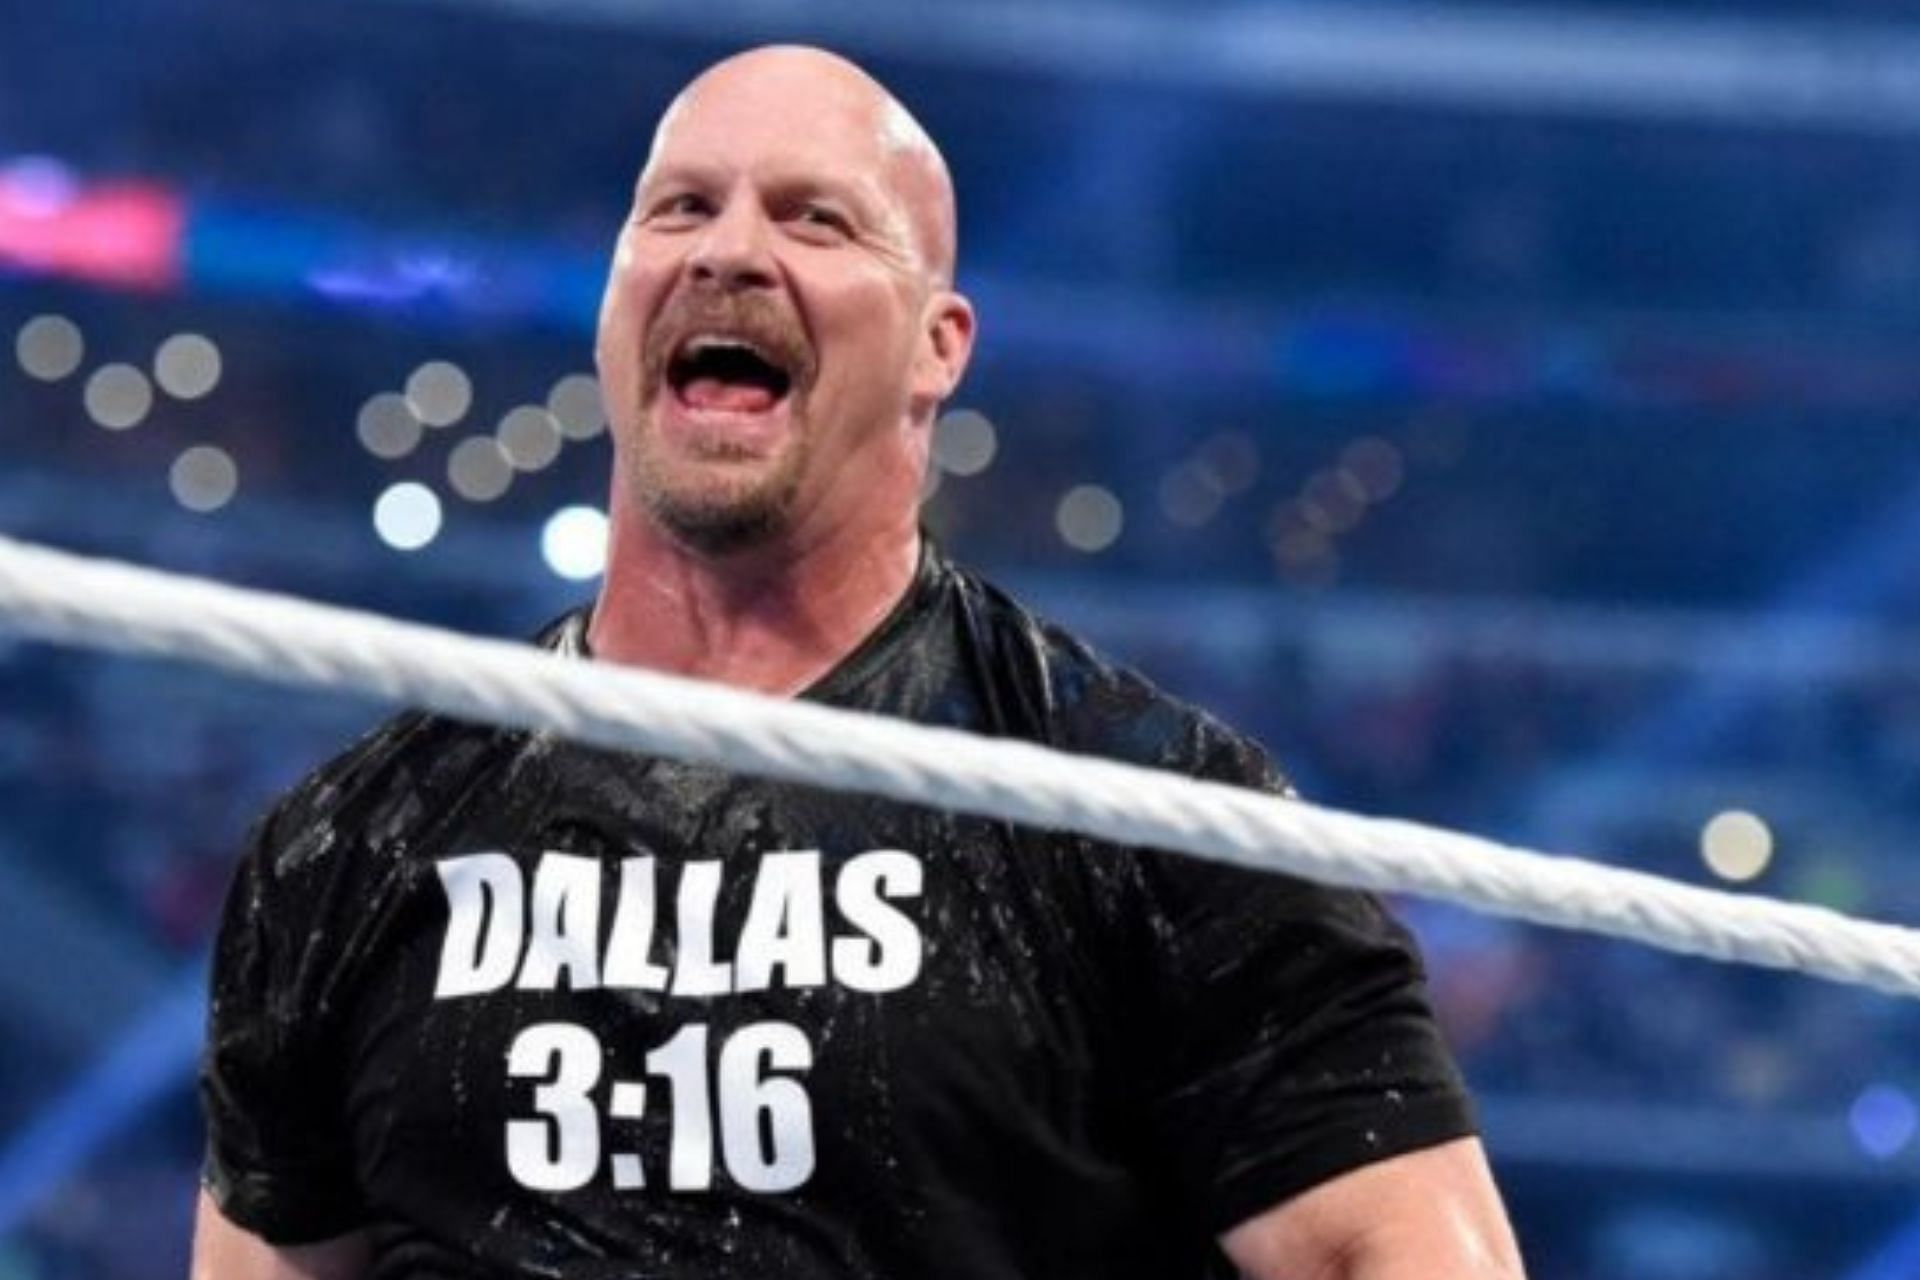 A dream match with Steve Austin and a current AEW star almost happened